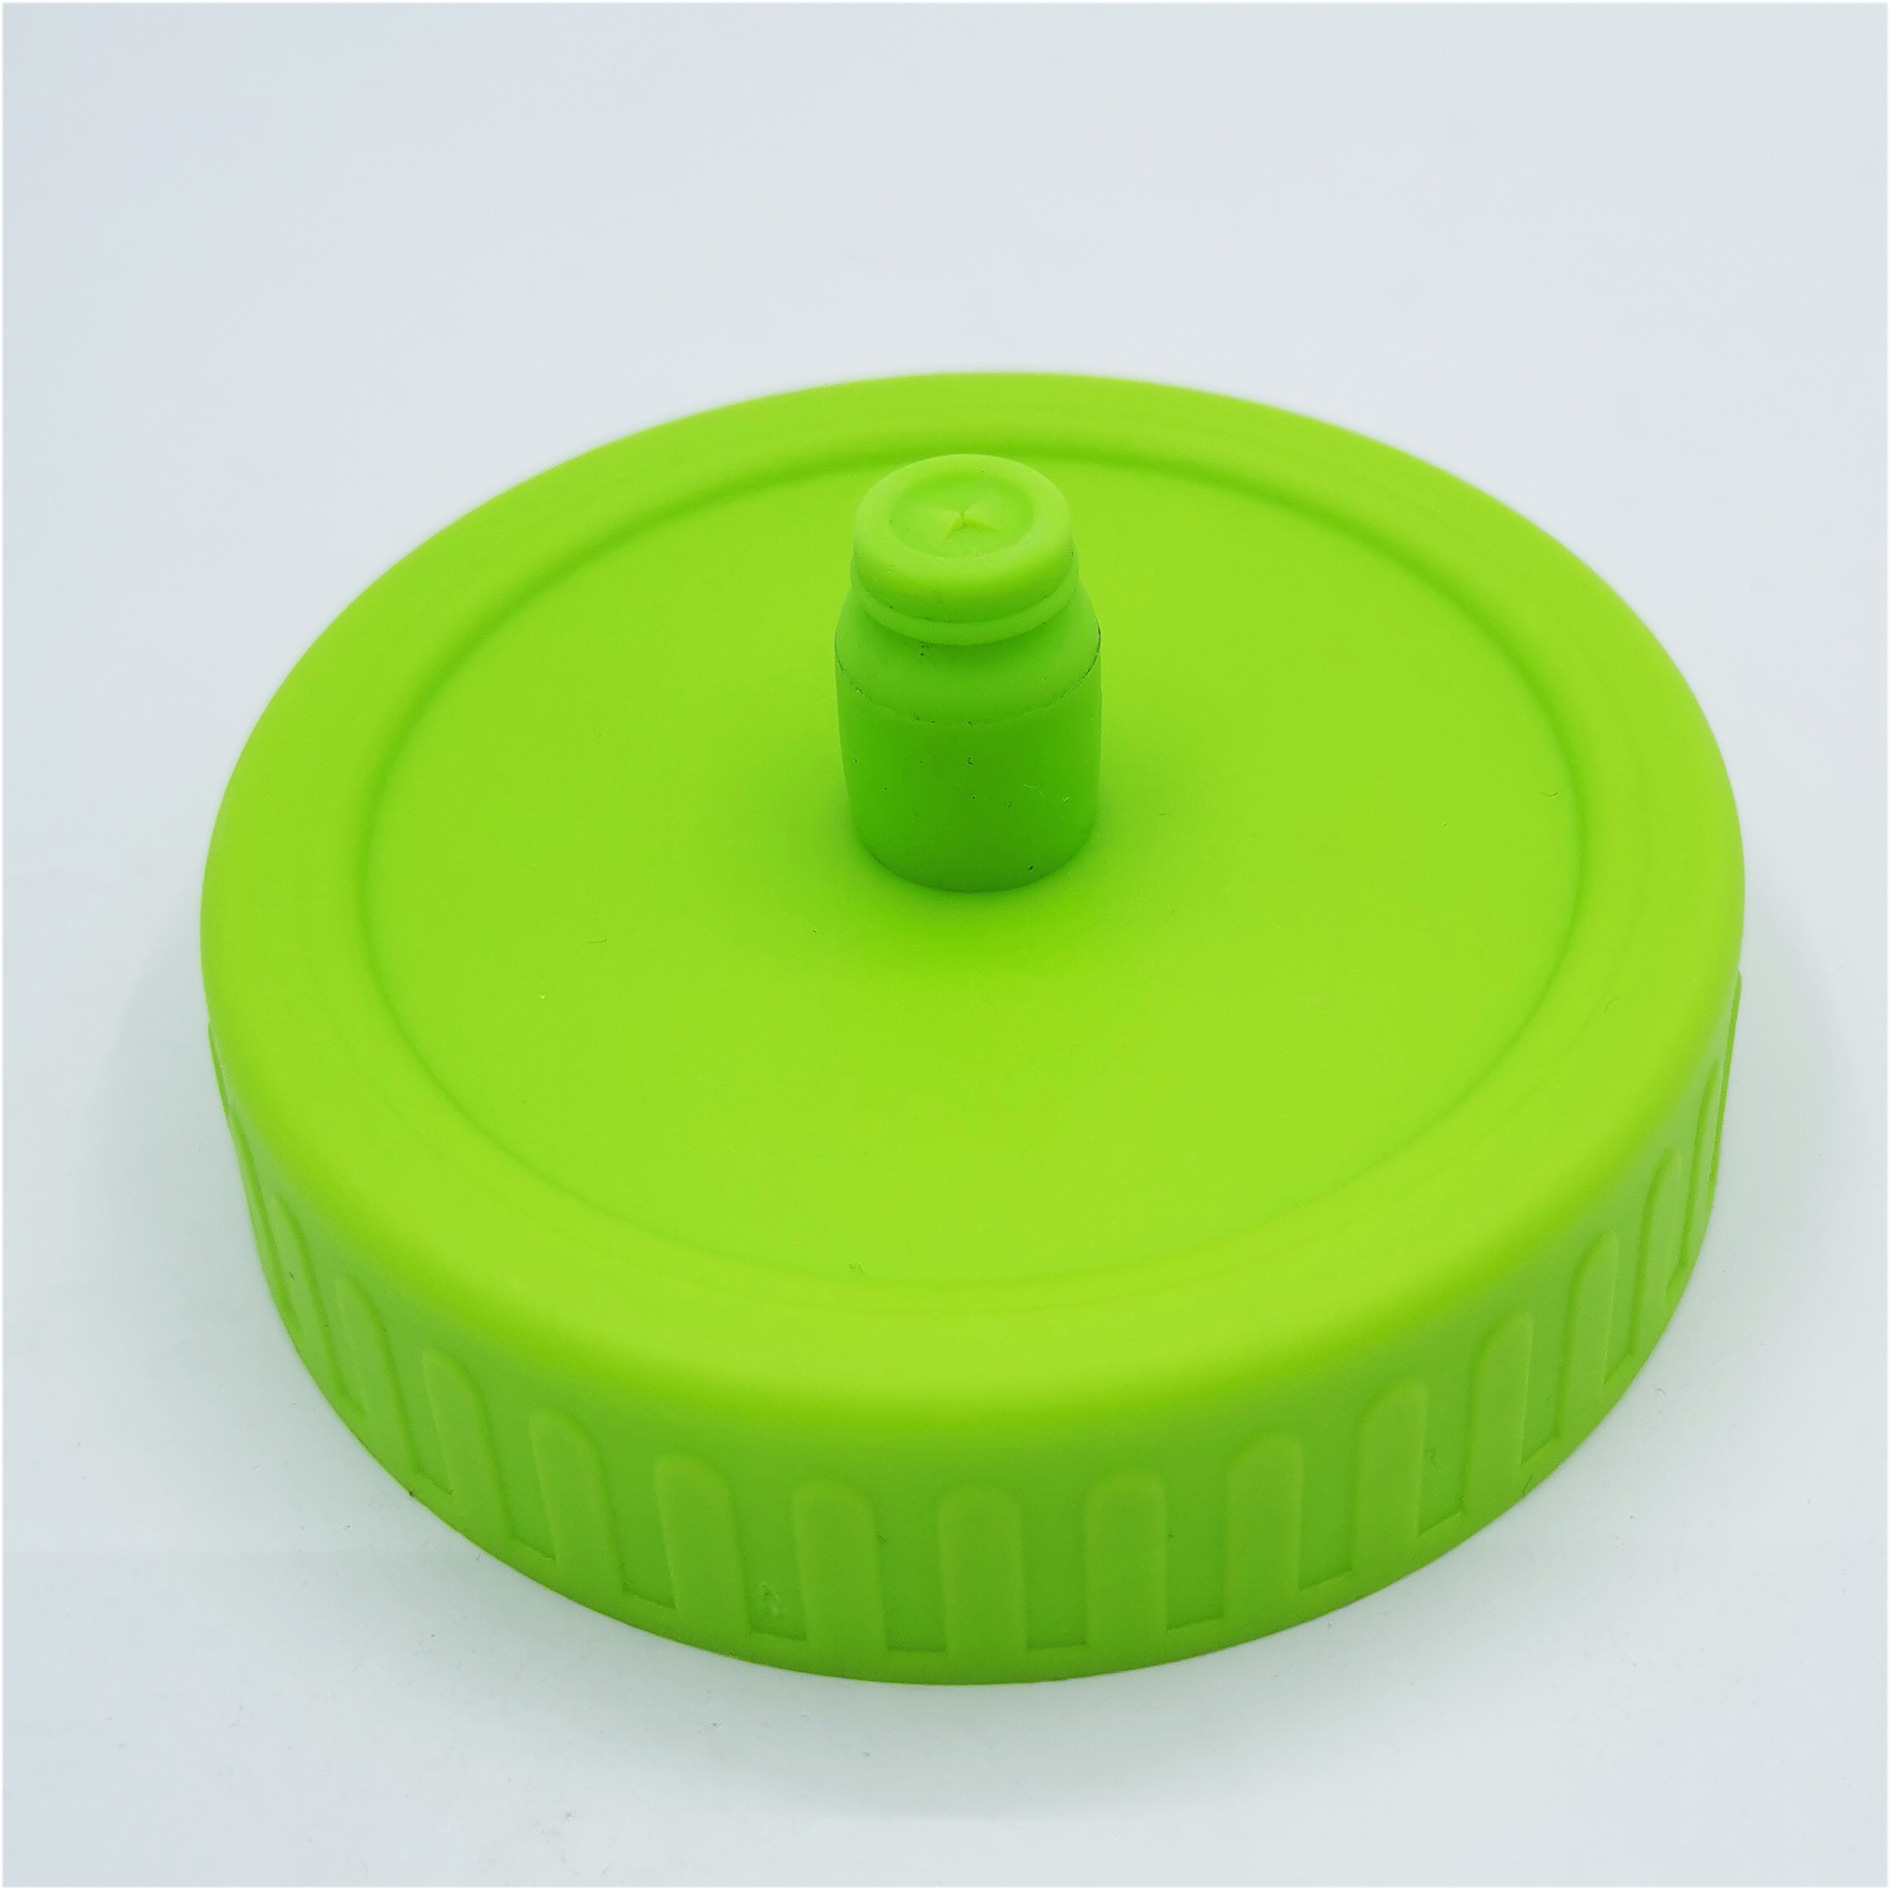 Mason Jar Silicone Fermentation Cap Large Mason Cup Pickled Vegetable Bottle Sealing Cap 86mm Wide Mouth Mason Bottle Silicone Cup Cover